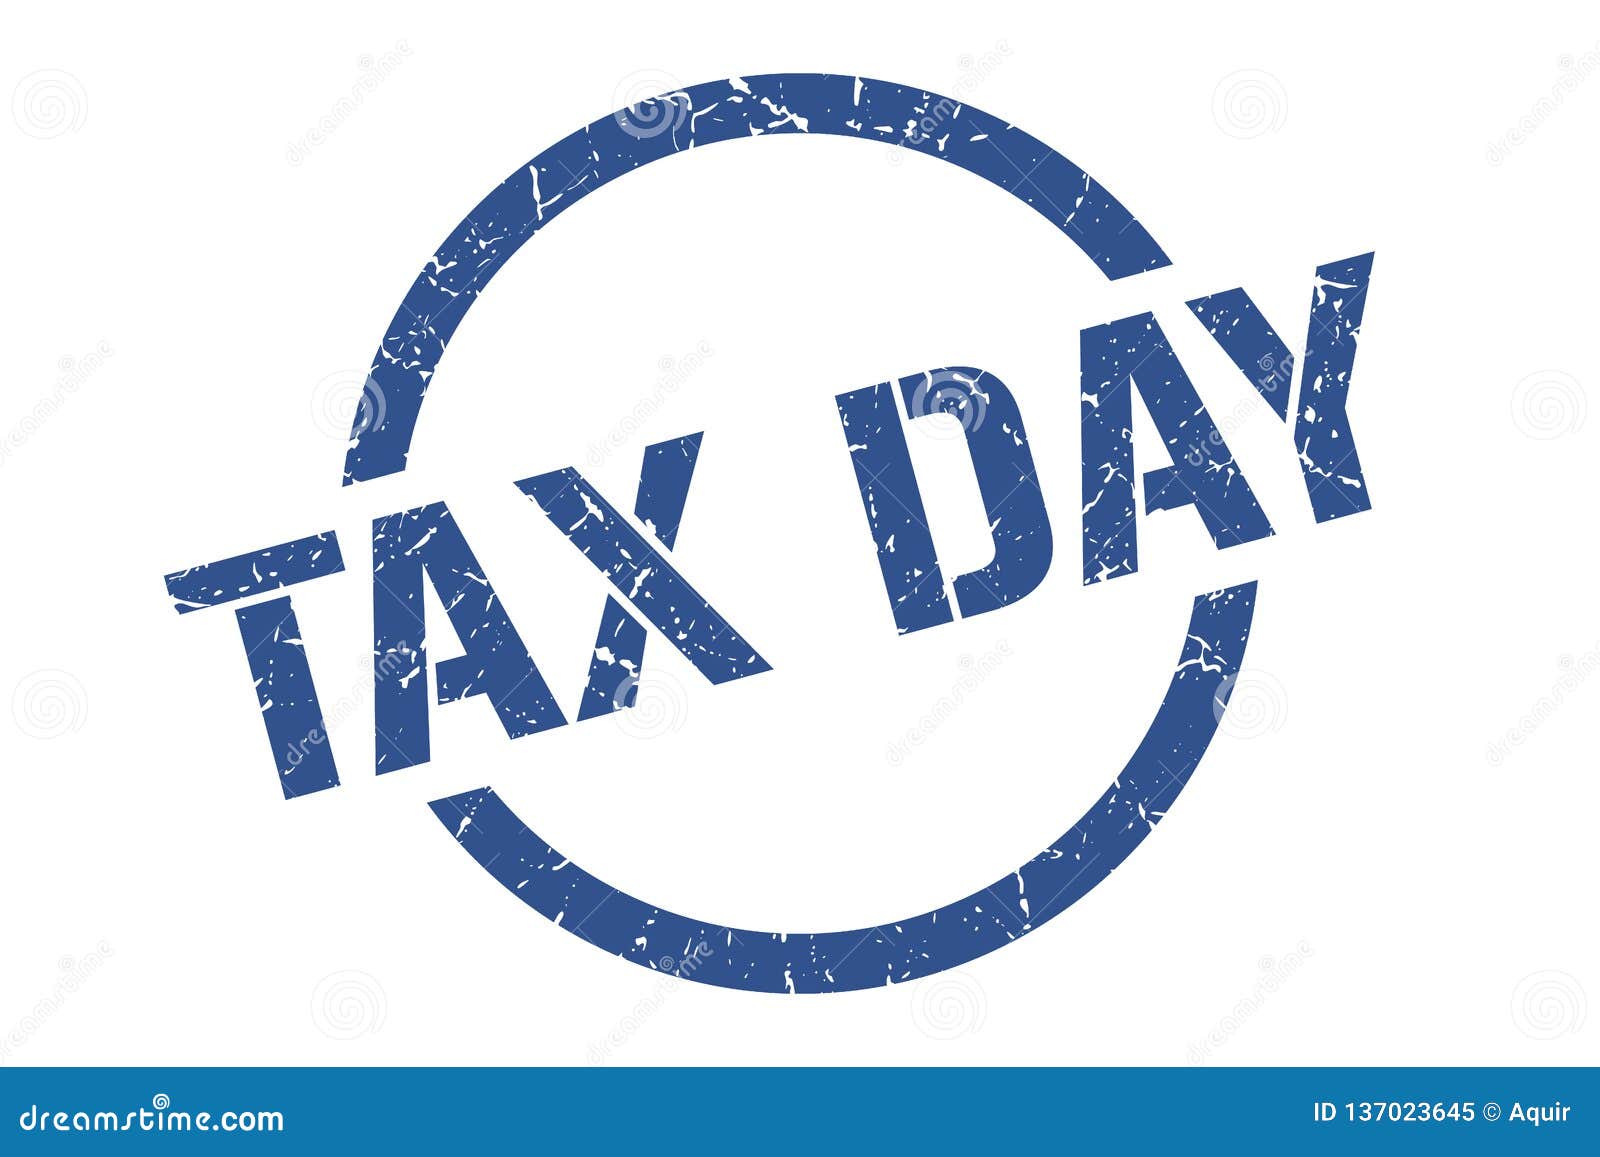 Tax day stamp stock vector. Illustration of grungy, scratched - 137023645